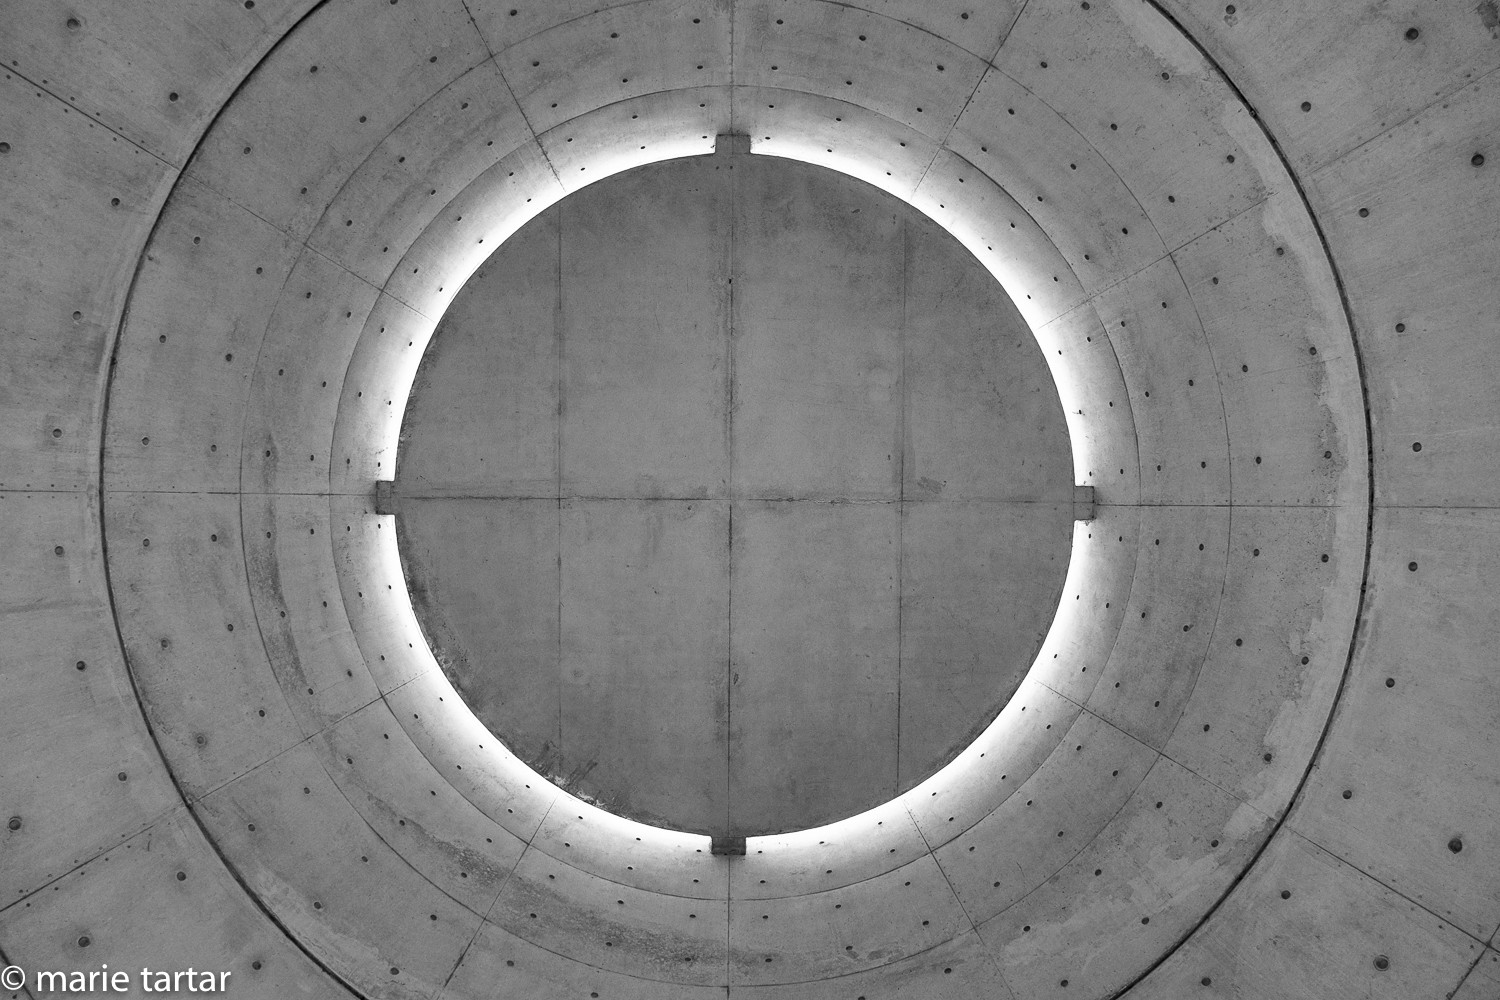 Ceiling of the meditation space designed by Tadao Ando for UNESCO in 1995